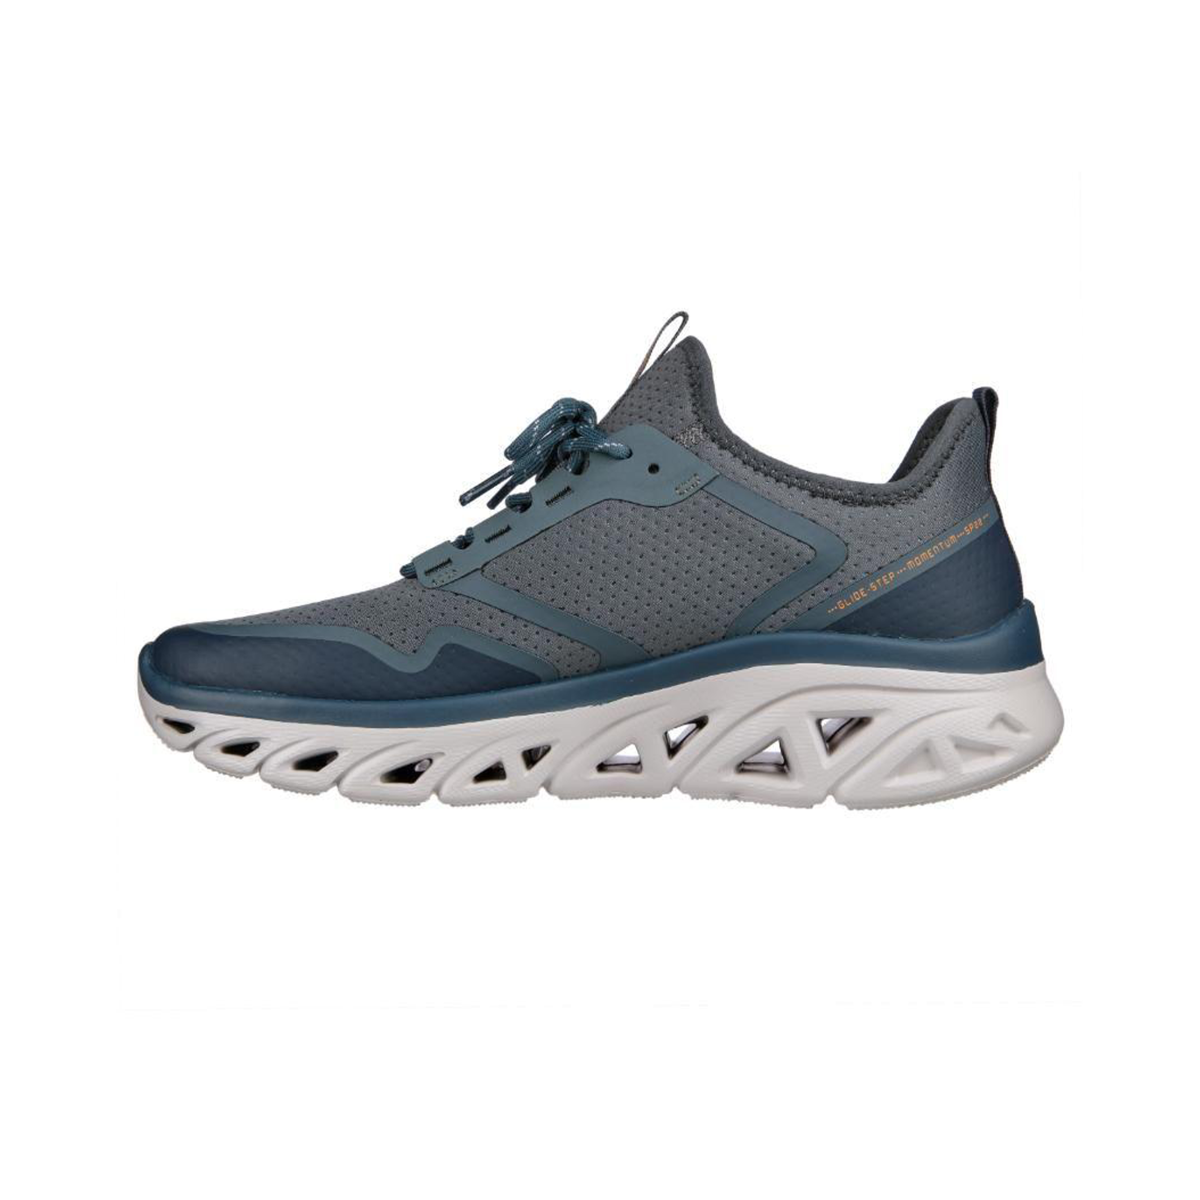 Skechers Glide Step Sports Shoes For Men, Navy